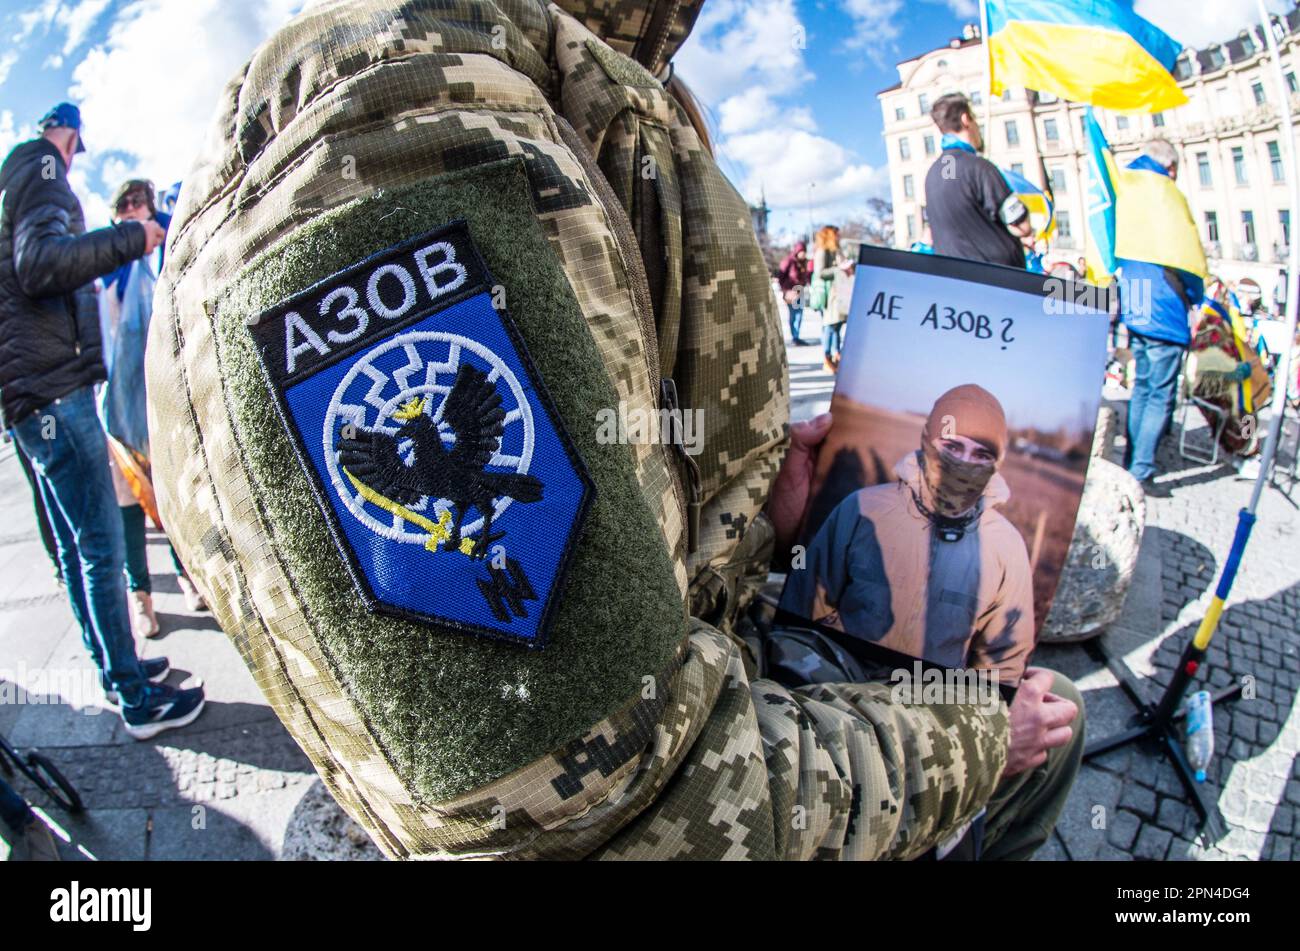 Munich, Bavaria, Germany. 25th Mar, 2023. A demonstrator in Munich, Germany wears patches of the former Azov Battalion after holding a speech about the Azovstal defenders of Mariupol, some of whom are still in Russian captivity. The former Azov Battalion was converted to the Azov Regiment and the highly taboo Wolfsangel displayed here was changed and forbidden. Such displays in Germany are currently isolated incidents and there is currently no evidence of neonazi influence at the demos. Many who demonstrate for the plight of the Azovstal defenders conflate them with the Azov Regiment who were Stock Photo